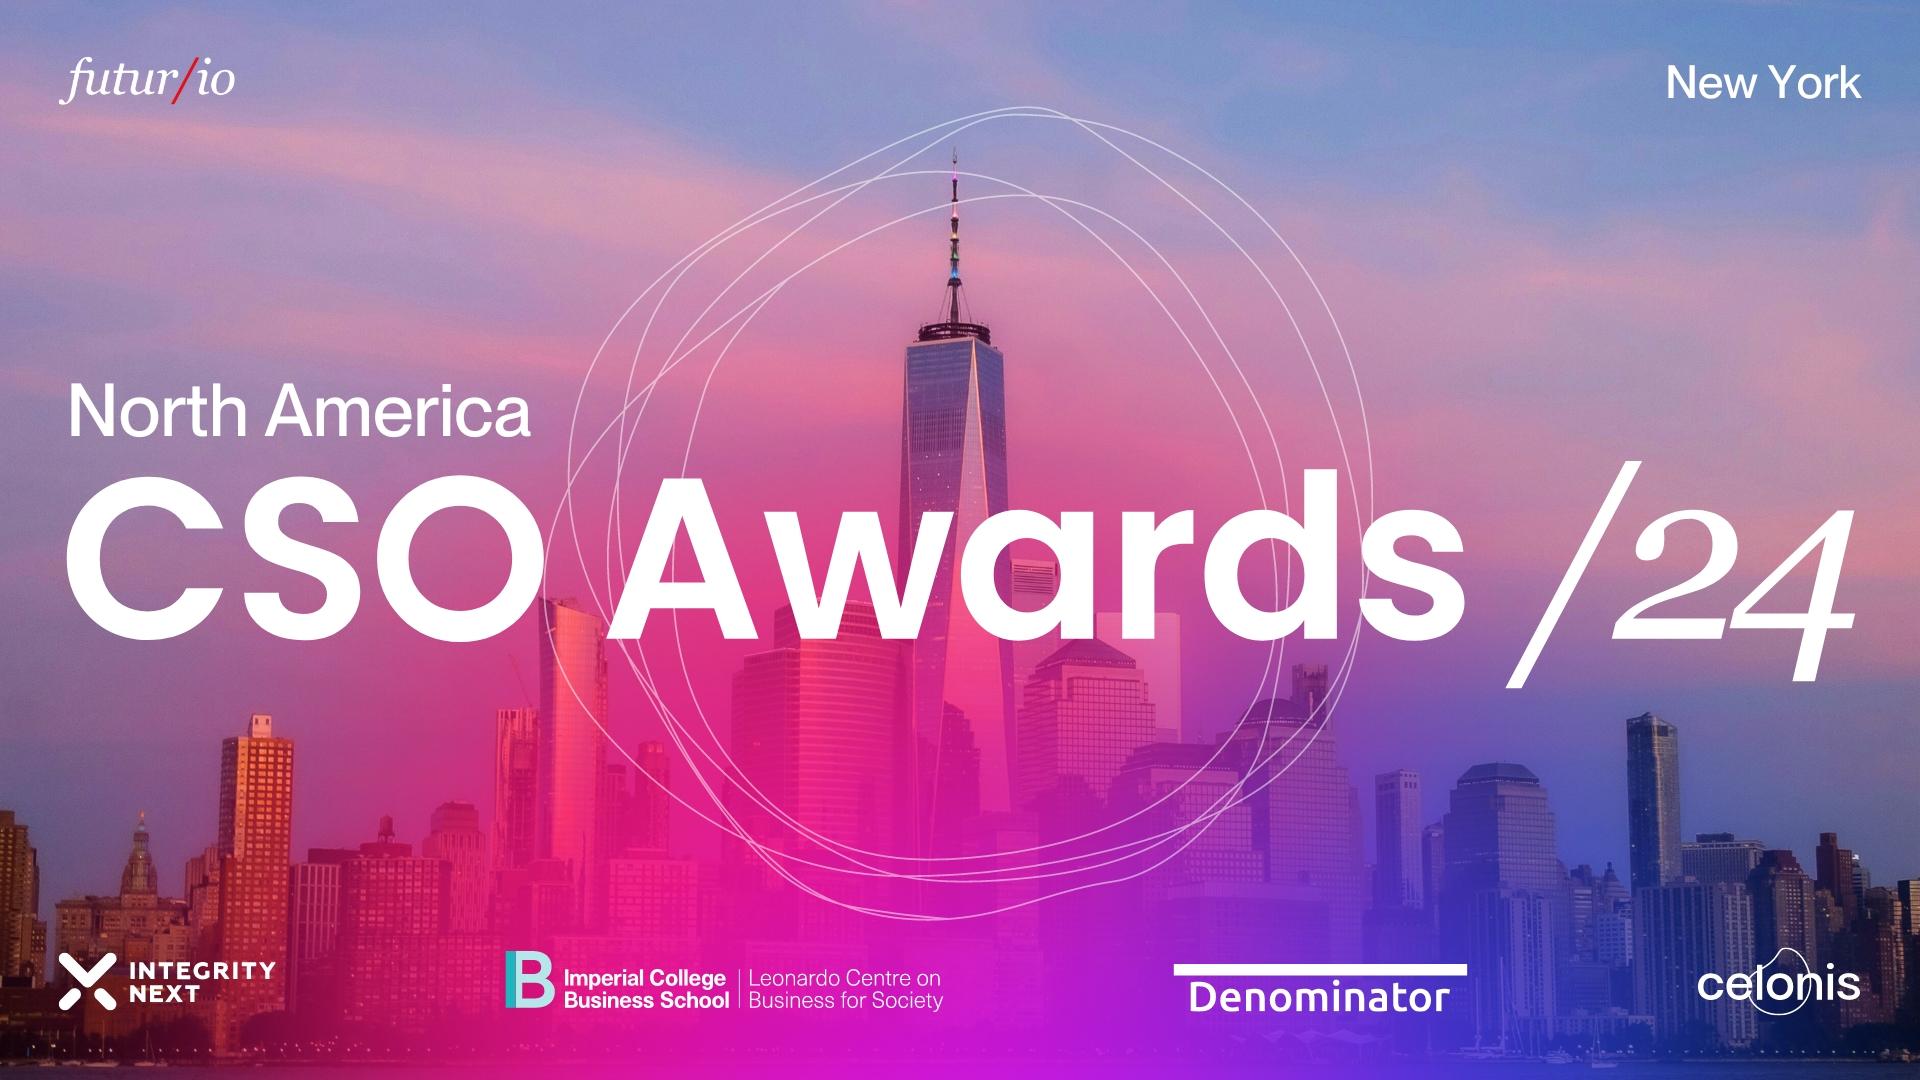 Denominator as scientific data and research partner for CSO Awards North America during NYC Climate Week